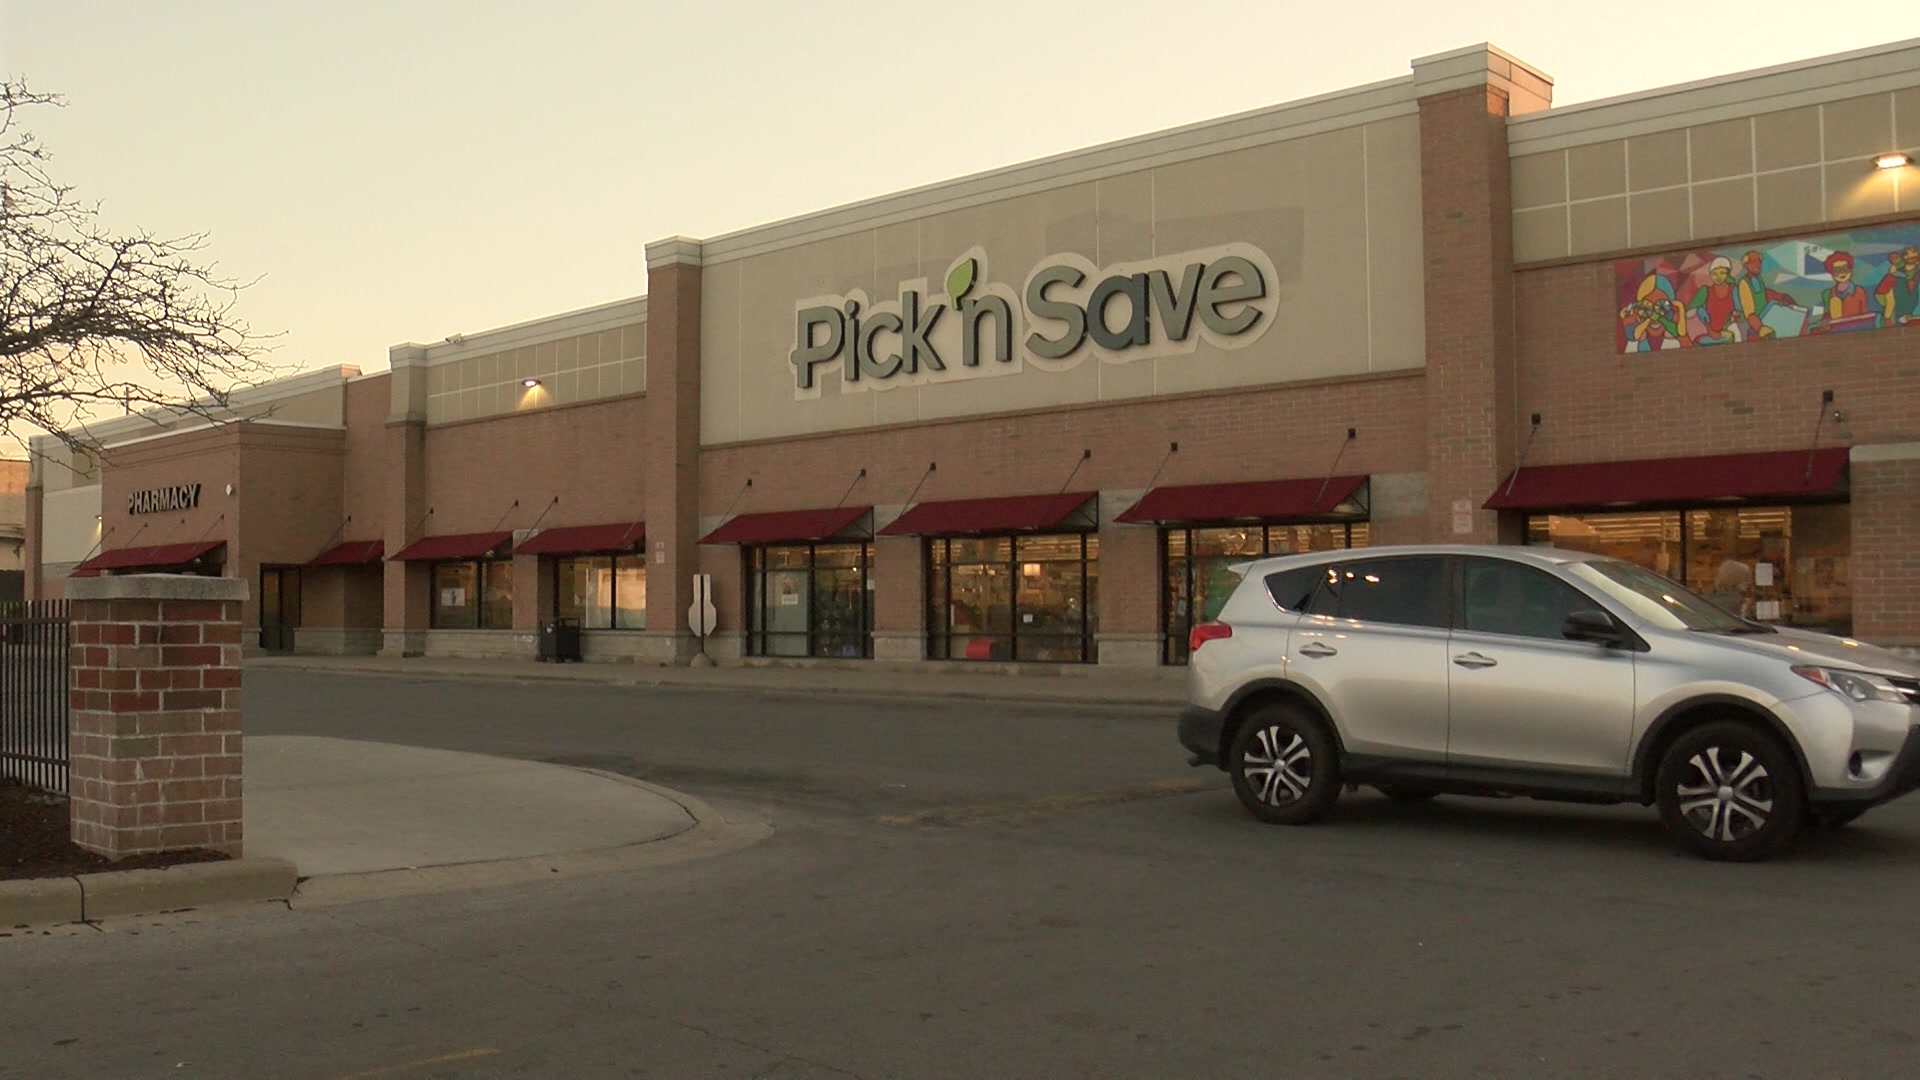 From Mice to Cleaning: Milwaukee Health Department Shuts Down Pick ‘n Save Store due to Rodent Infestation, Partners with Health Department for Solution